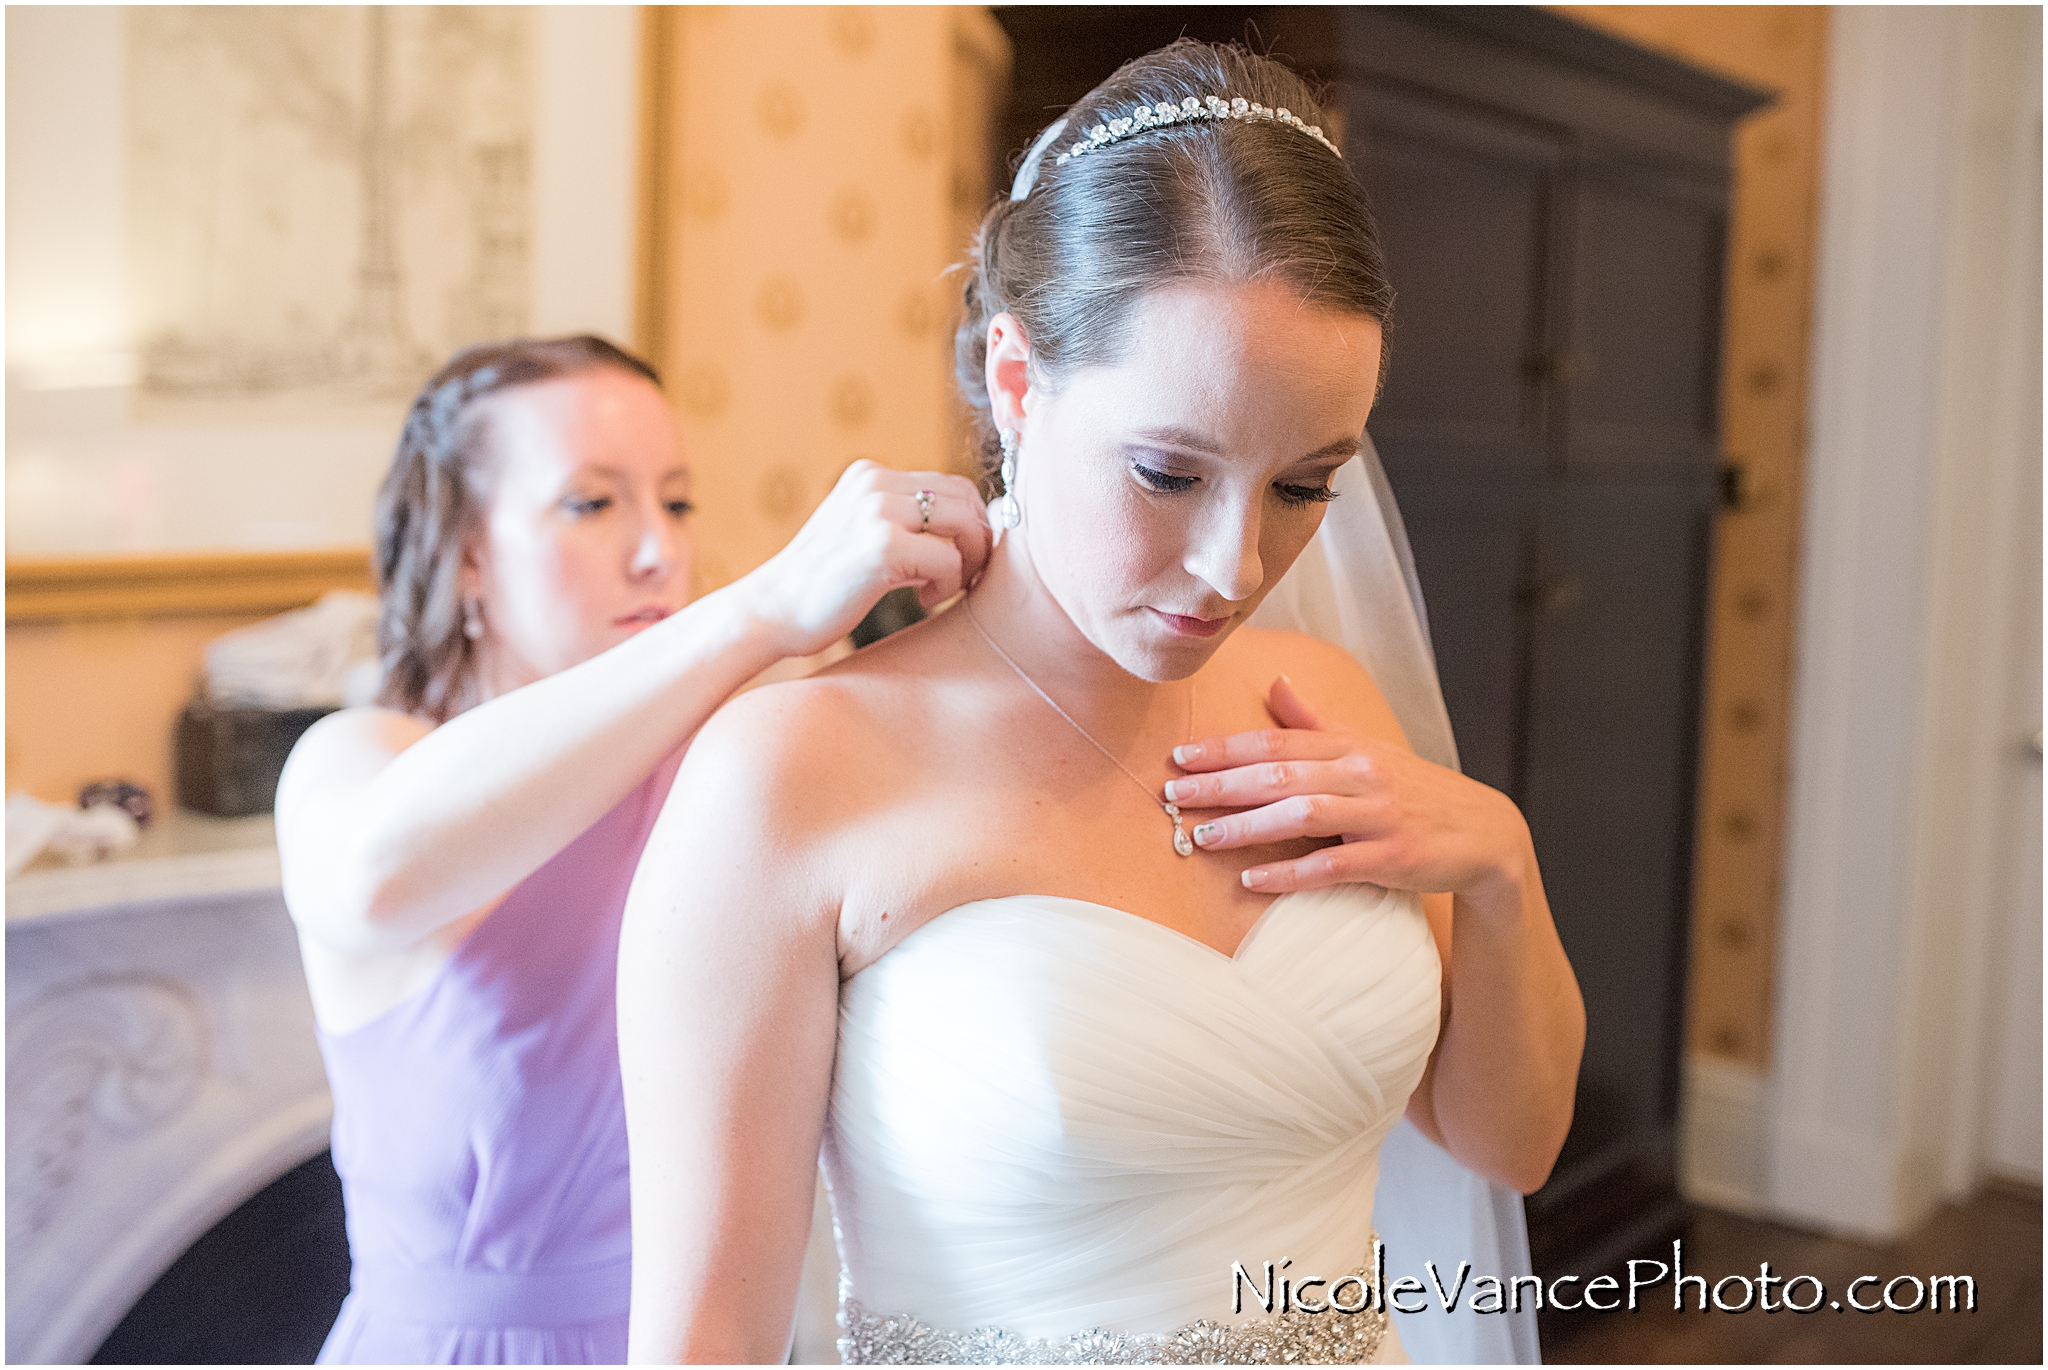 The bride gets help with her necklace.